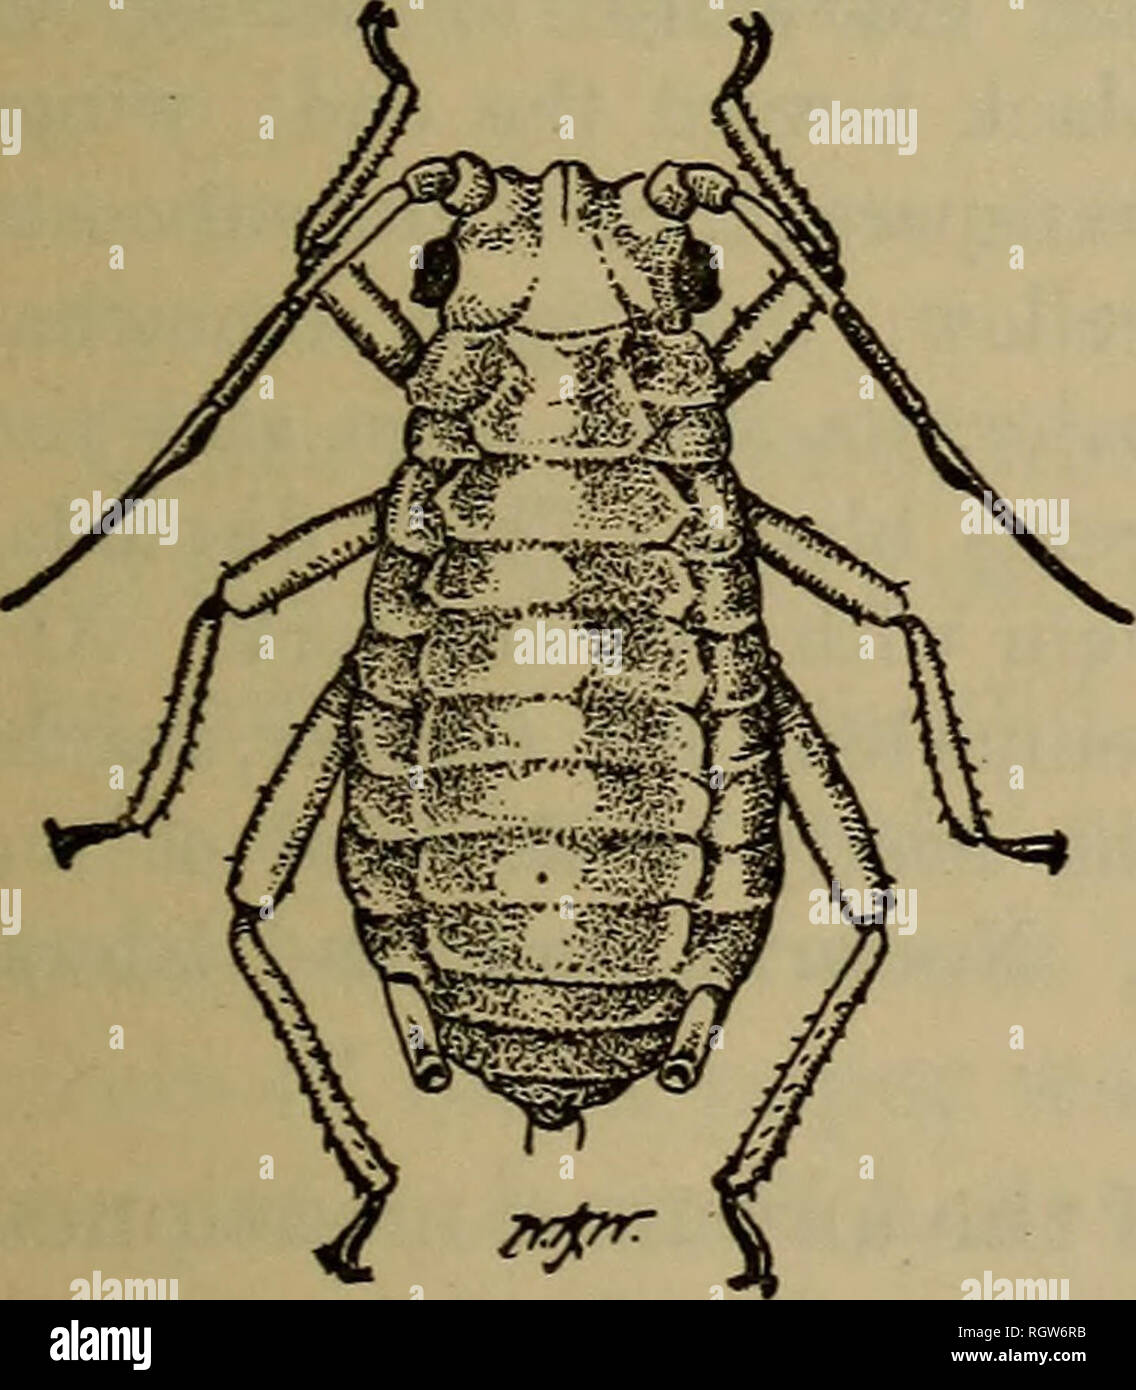 . Bulletin. Insects; Insect pests; Entomology; Insects; Insect pests; Entomology. Fig. 12.—The spring grain-aphis: Young, first instar. Enlarged; actual size, 0.75 mm. (Original.) Measurements of antennal joints (average from 16 specimens): I, 0.066 mm.; II, 0.049 mm.; Ill, 0.226 mm.; IV, 0.140 mm.; V, 0.152 mm.; VI, base, 0.091 mm.; VI, filament, 0.225 mm.; total length, 0.951 mm. They are slightly pruinose in each stage. The material from which these data were taken is mounted on slides and is in the collections of the Bureau of Entomology, bearing Webster number 5151. The first generation,  Stock Photo